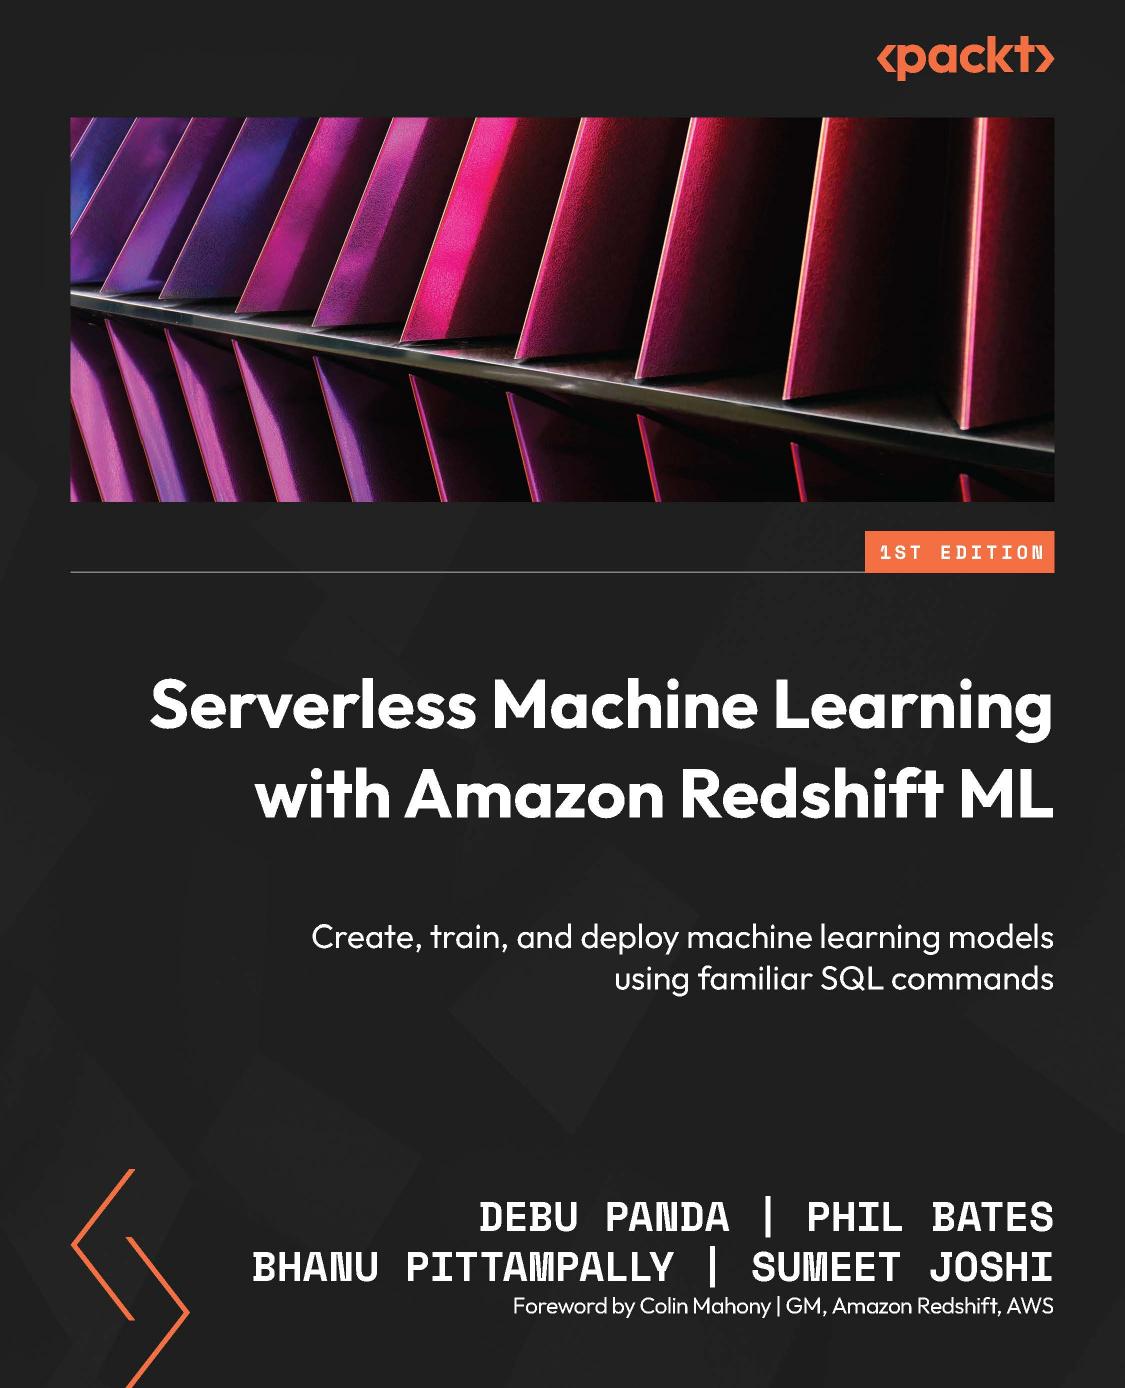 Serverless Machine Learning with Amazon Redshift ML: Create, train, and deploy machine learning models using familiar SQL commands by Debu Panda Phil Bates Bhanu Pittampally Sumeet Joshi